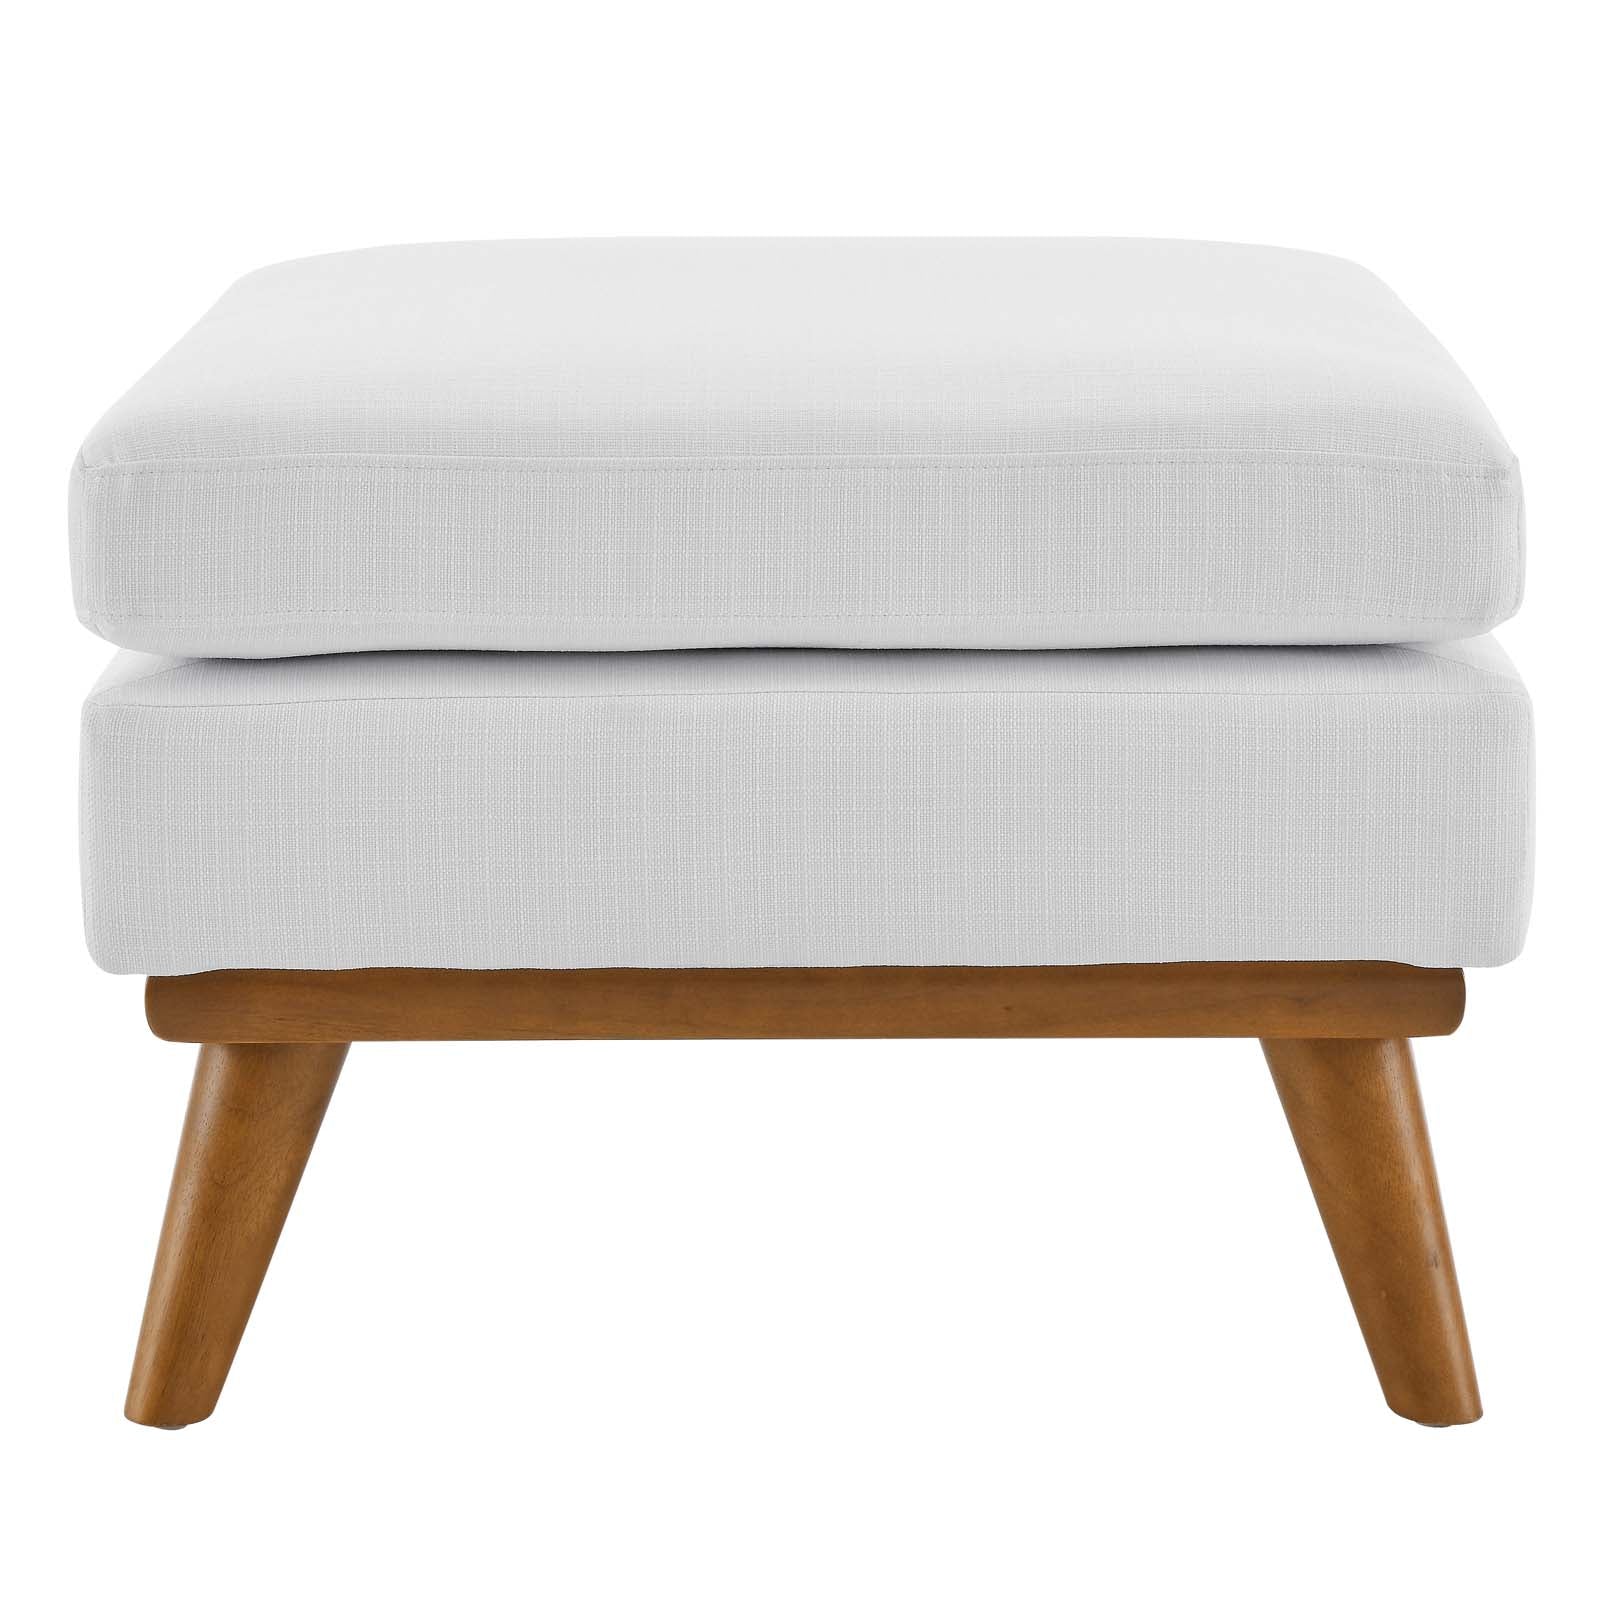 Modway Ottomans & Stools - Engage Upholstered Fabric Ottoman White